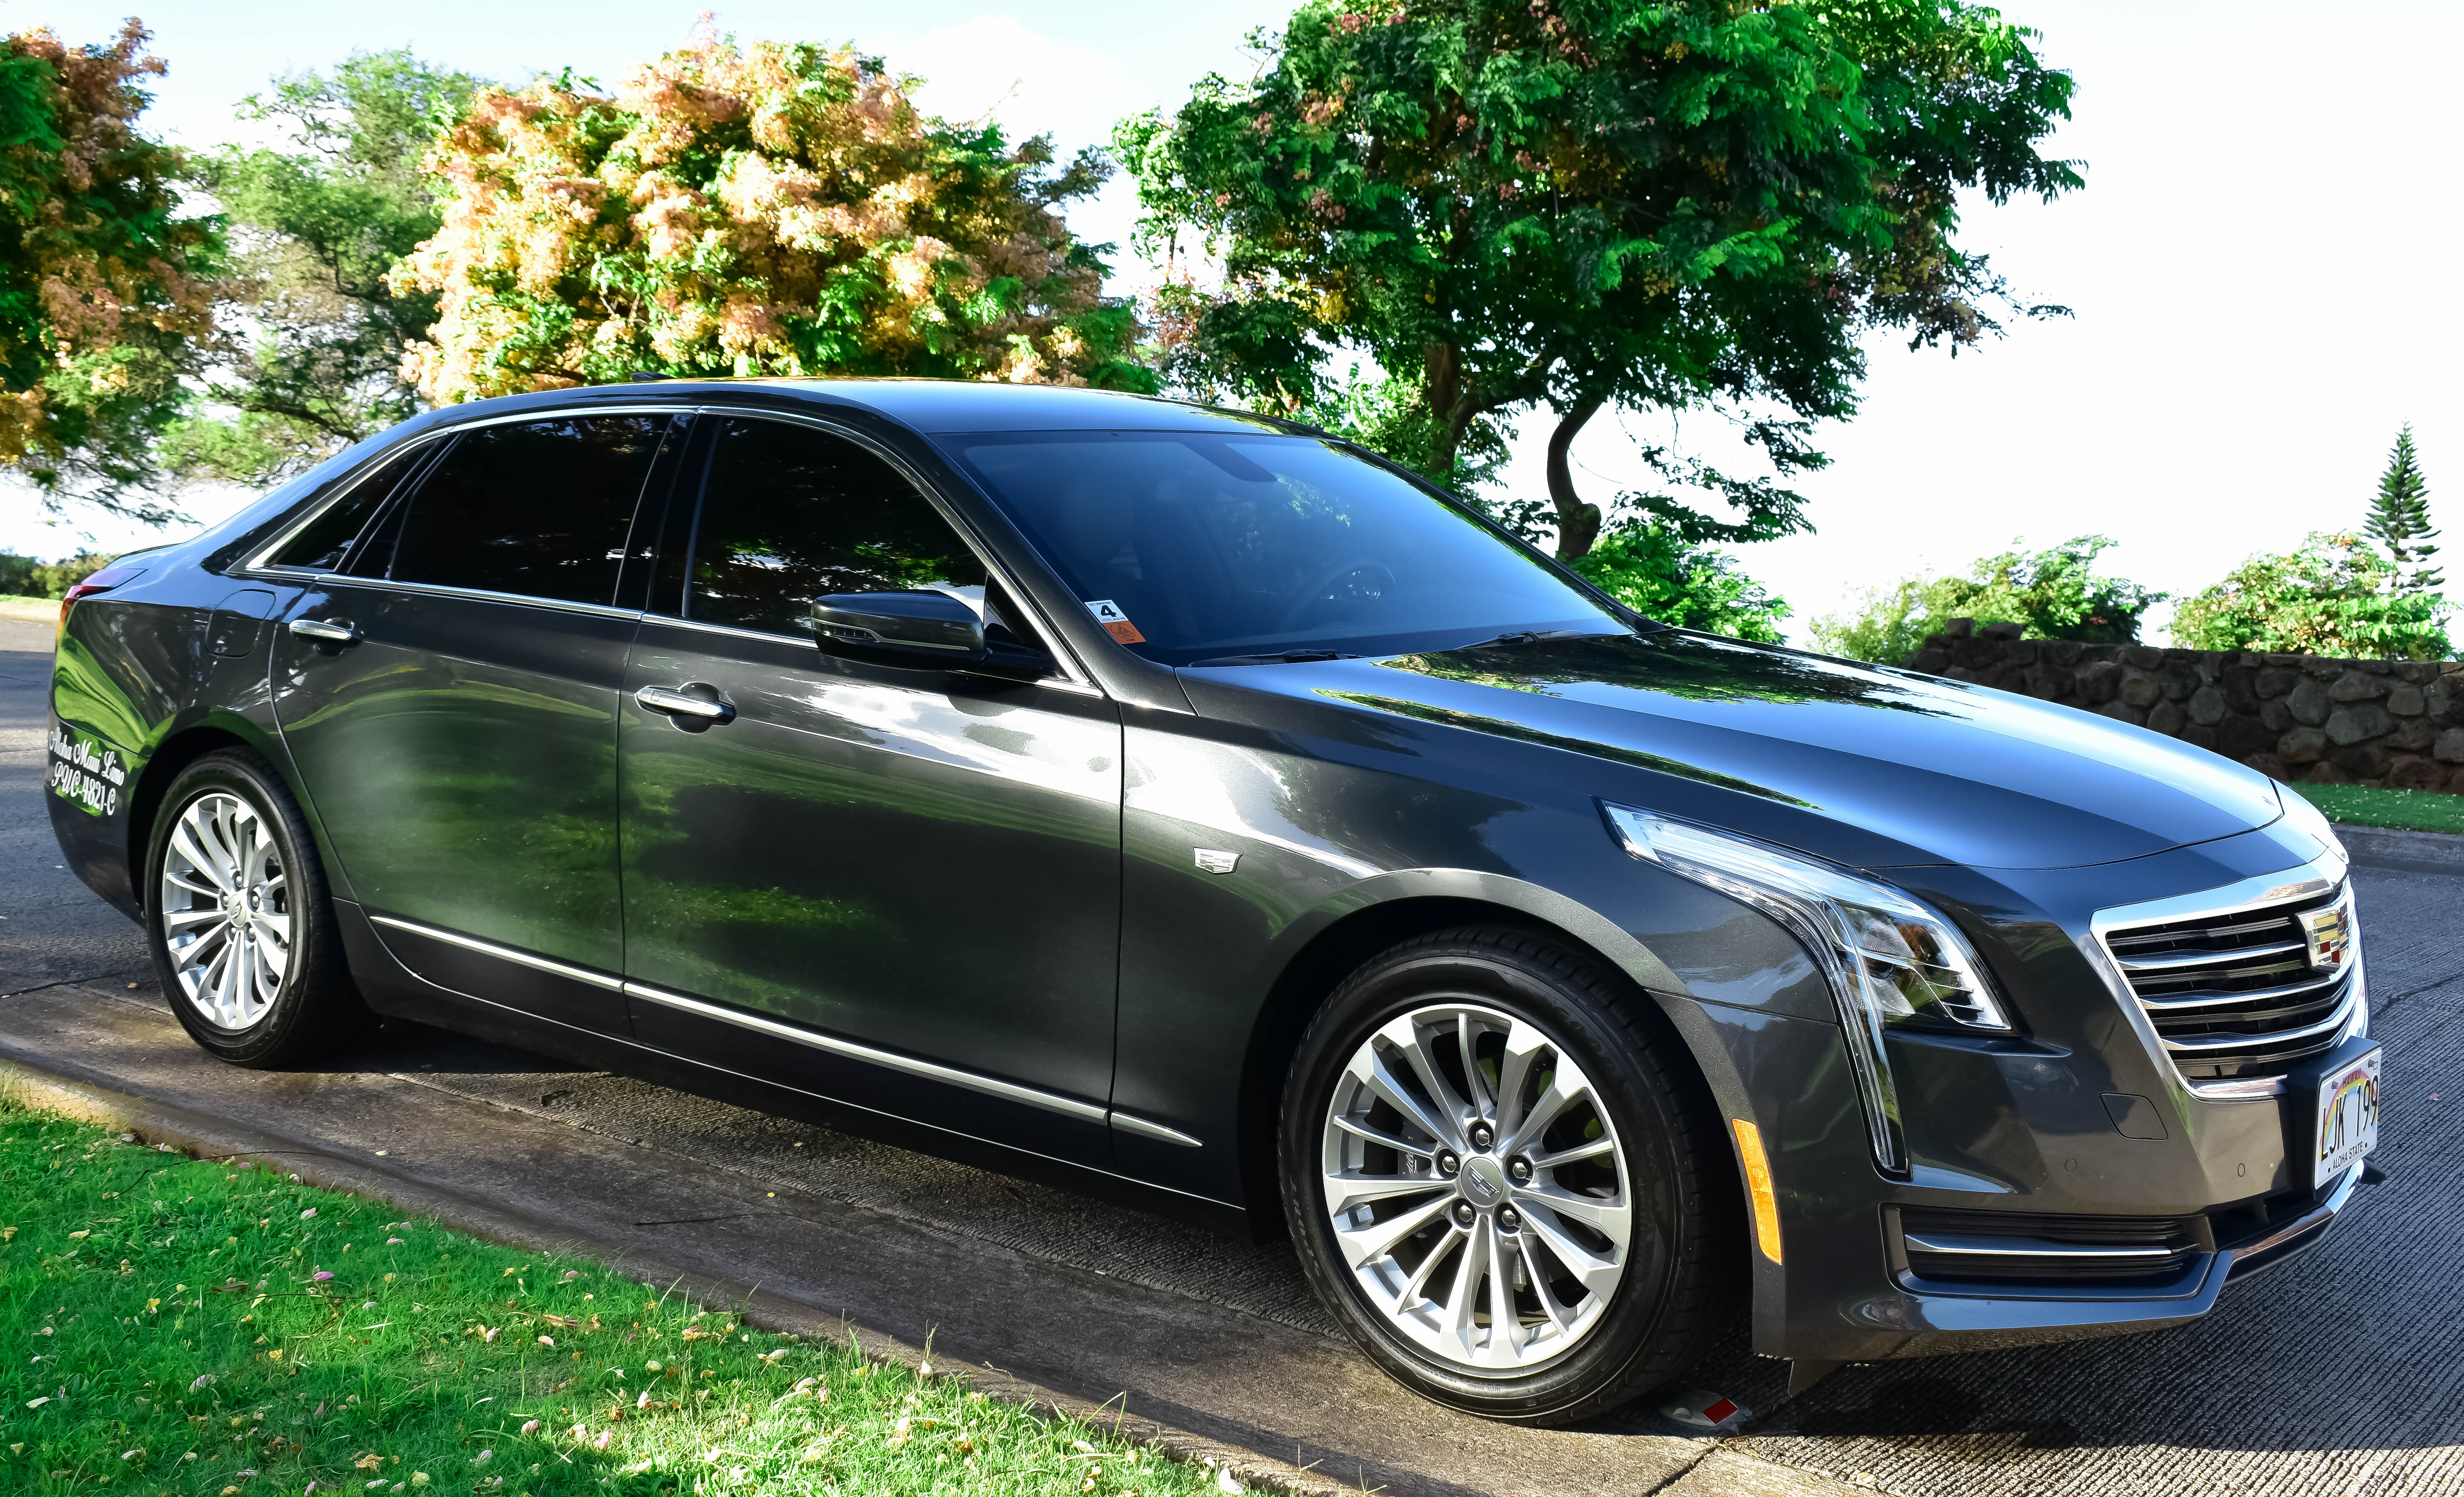 Hire a private luxurySedan and driver on Maui